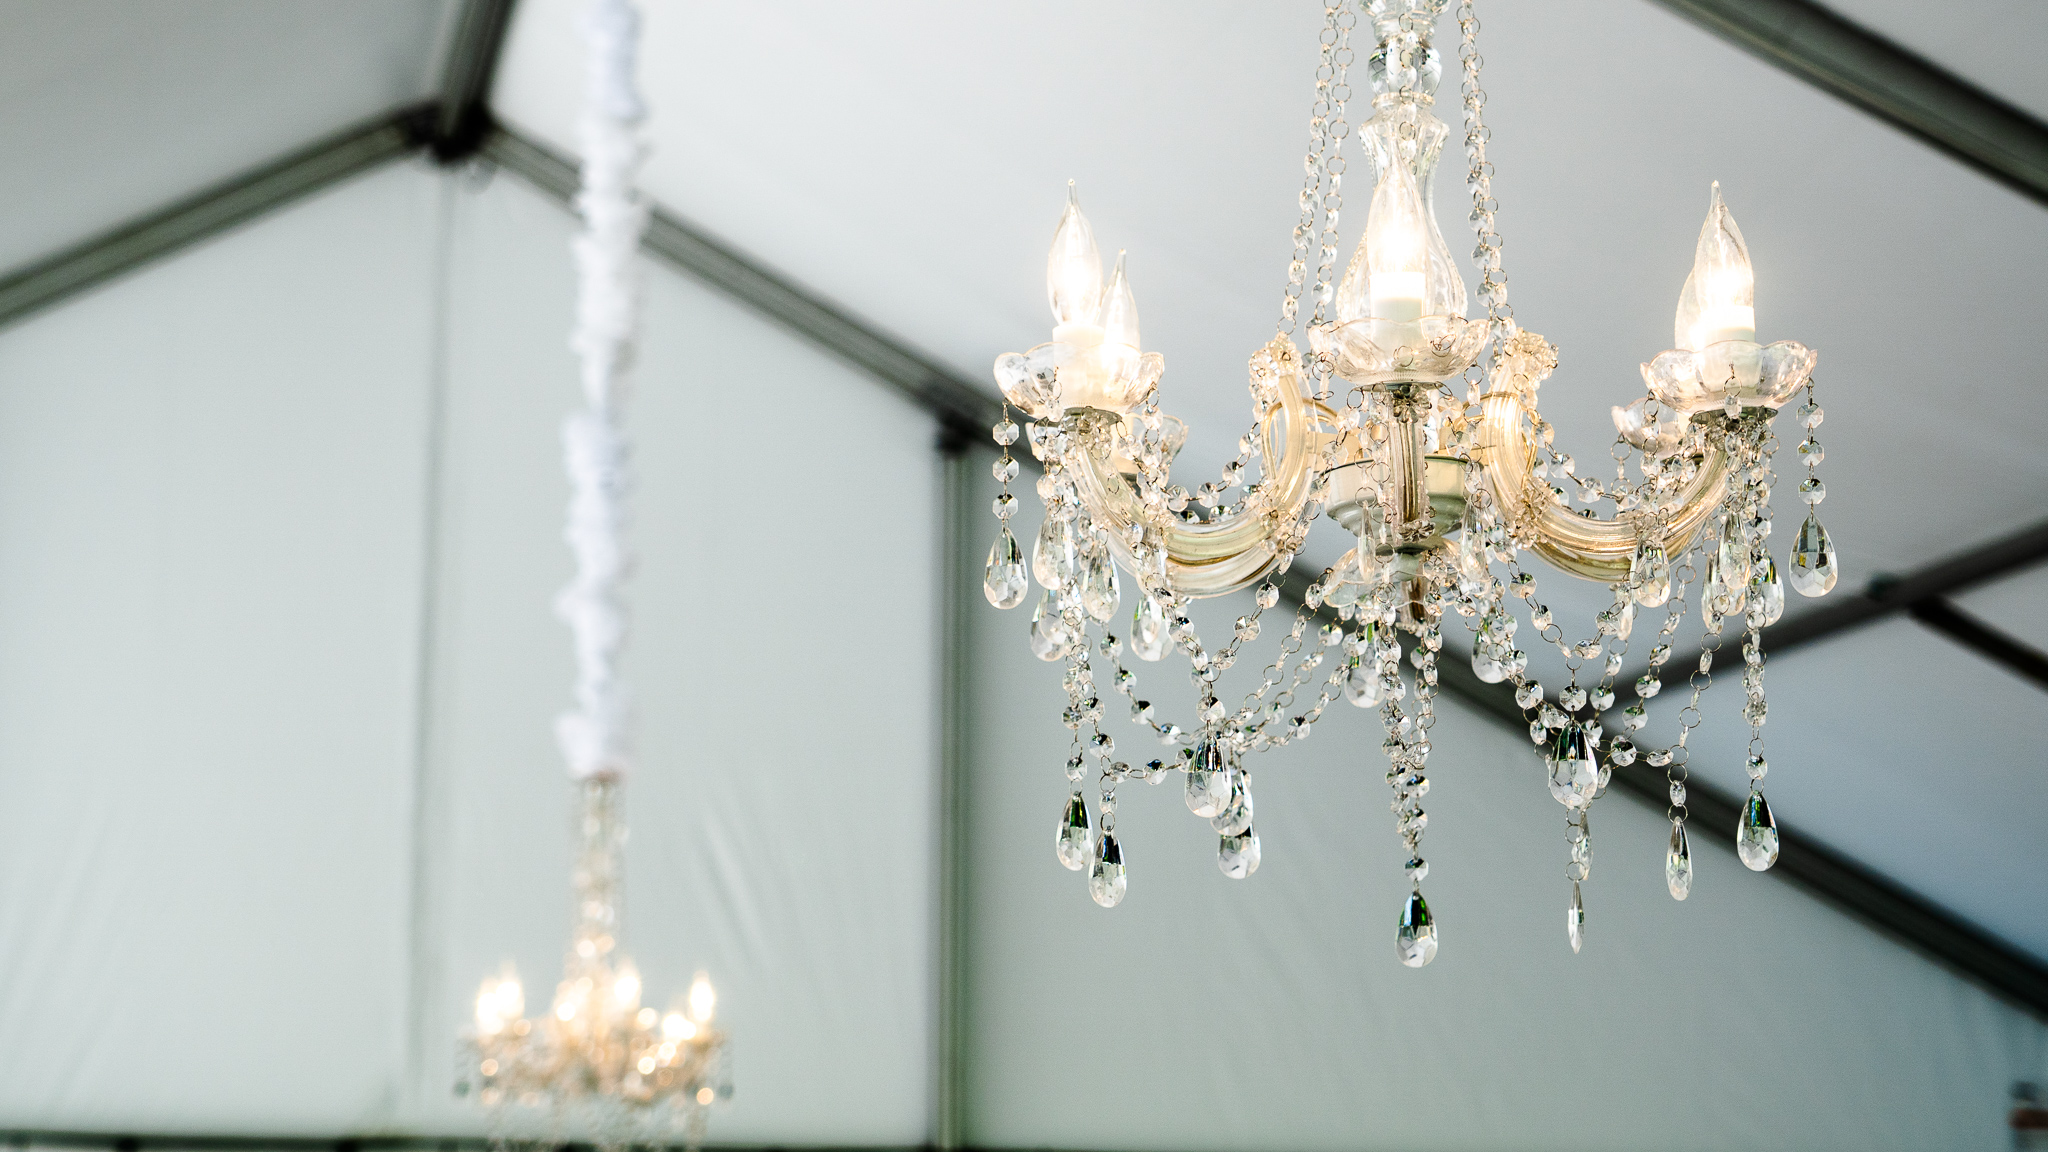 Chandeliers hanging in a tent.